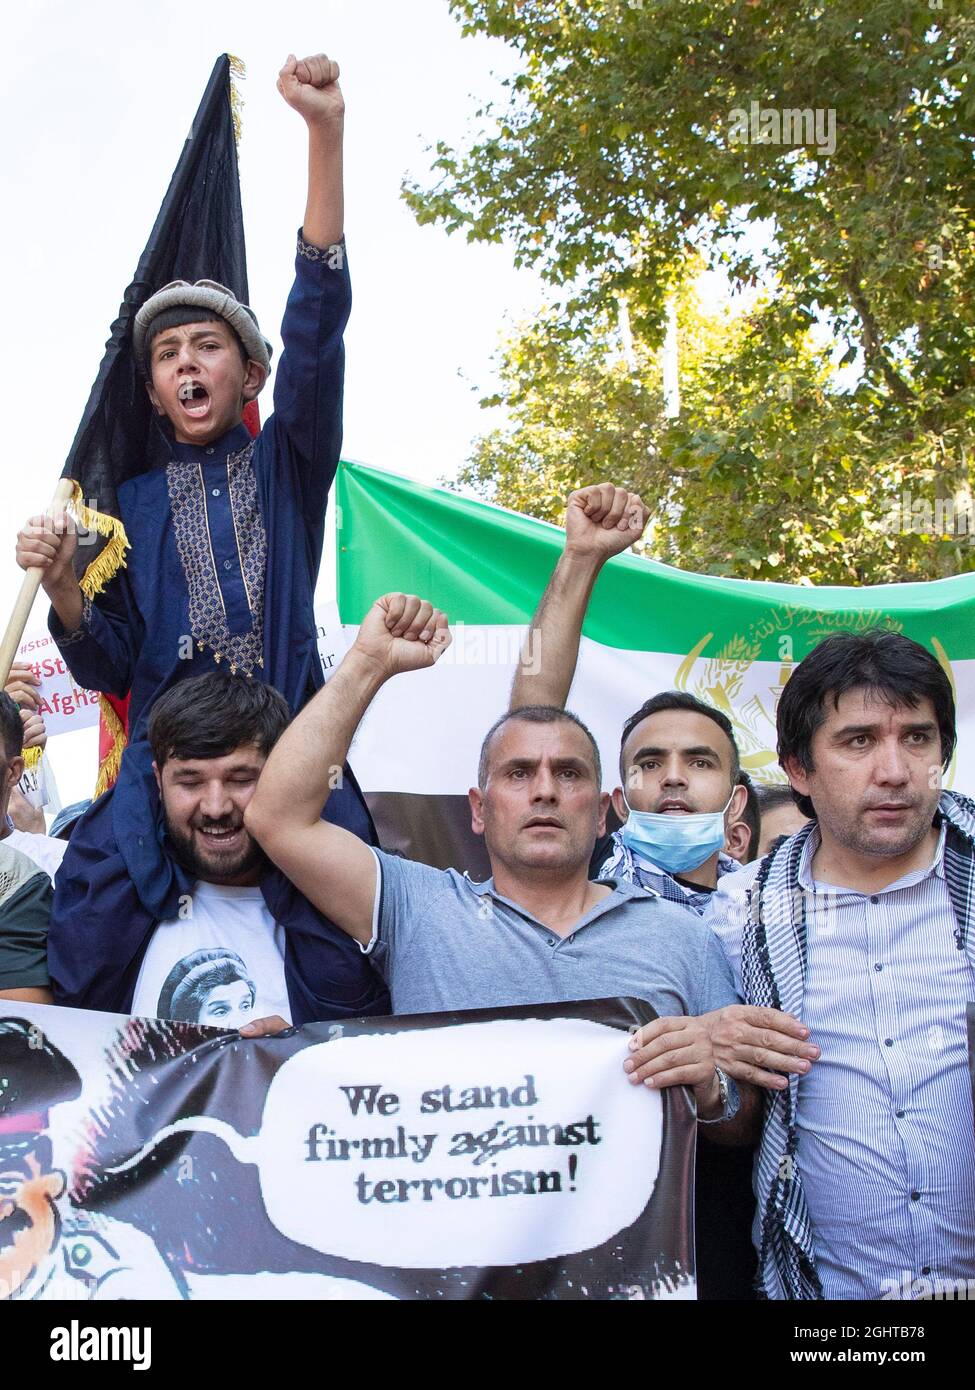 Protestors march to the Pakistani Embassy/High commission to highlight the supposed interference of the Pakistani military in Afghanistan Stock Photo